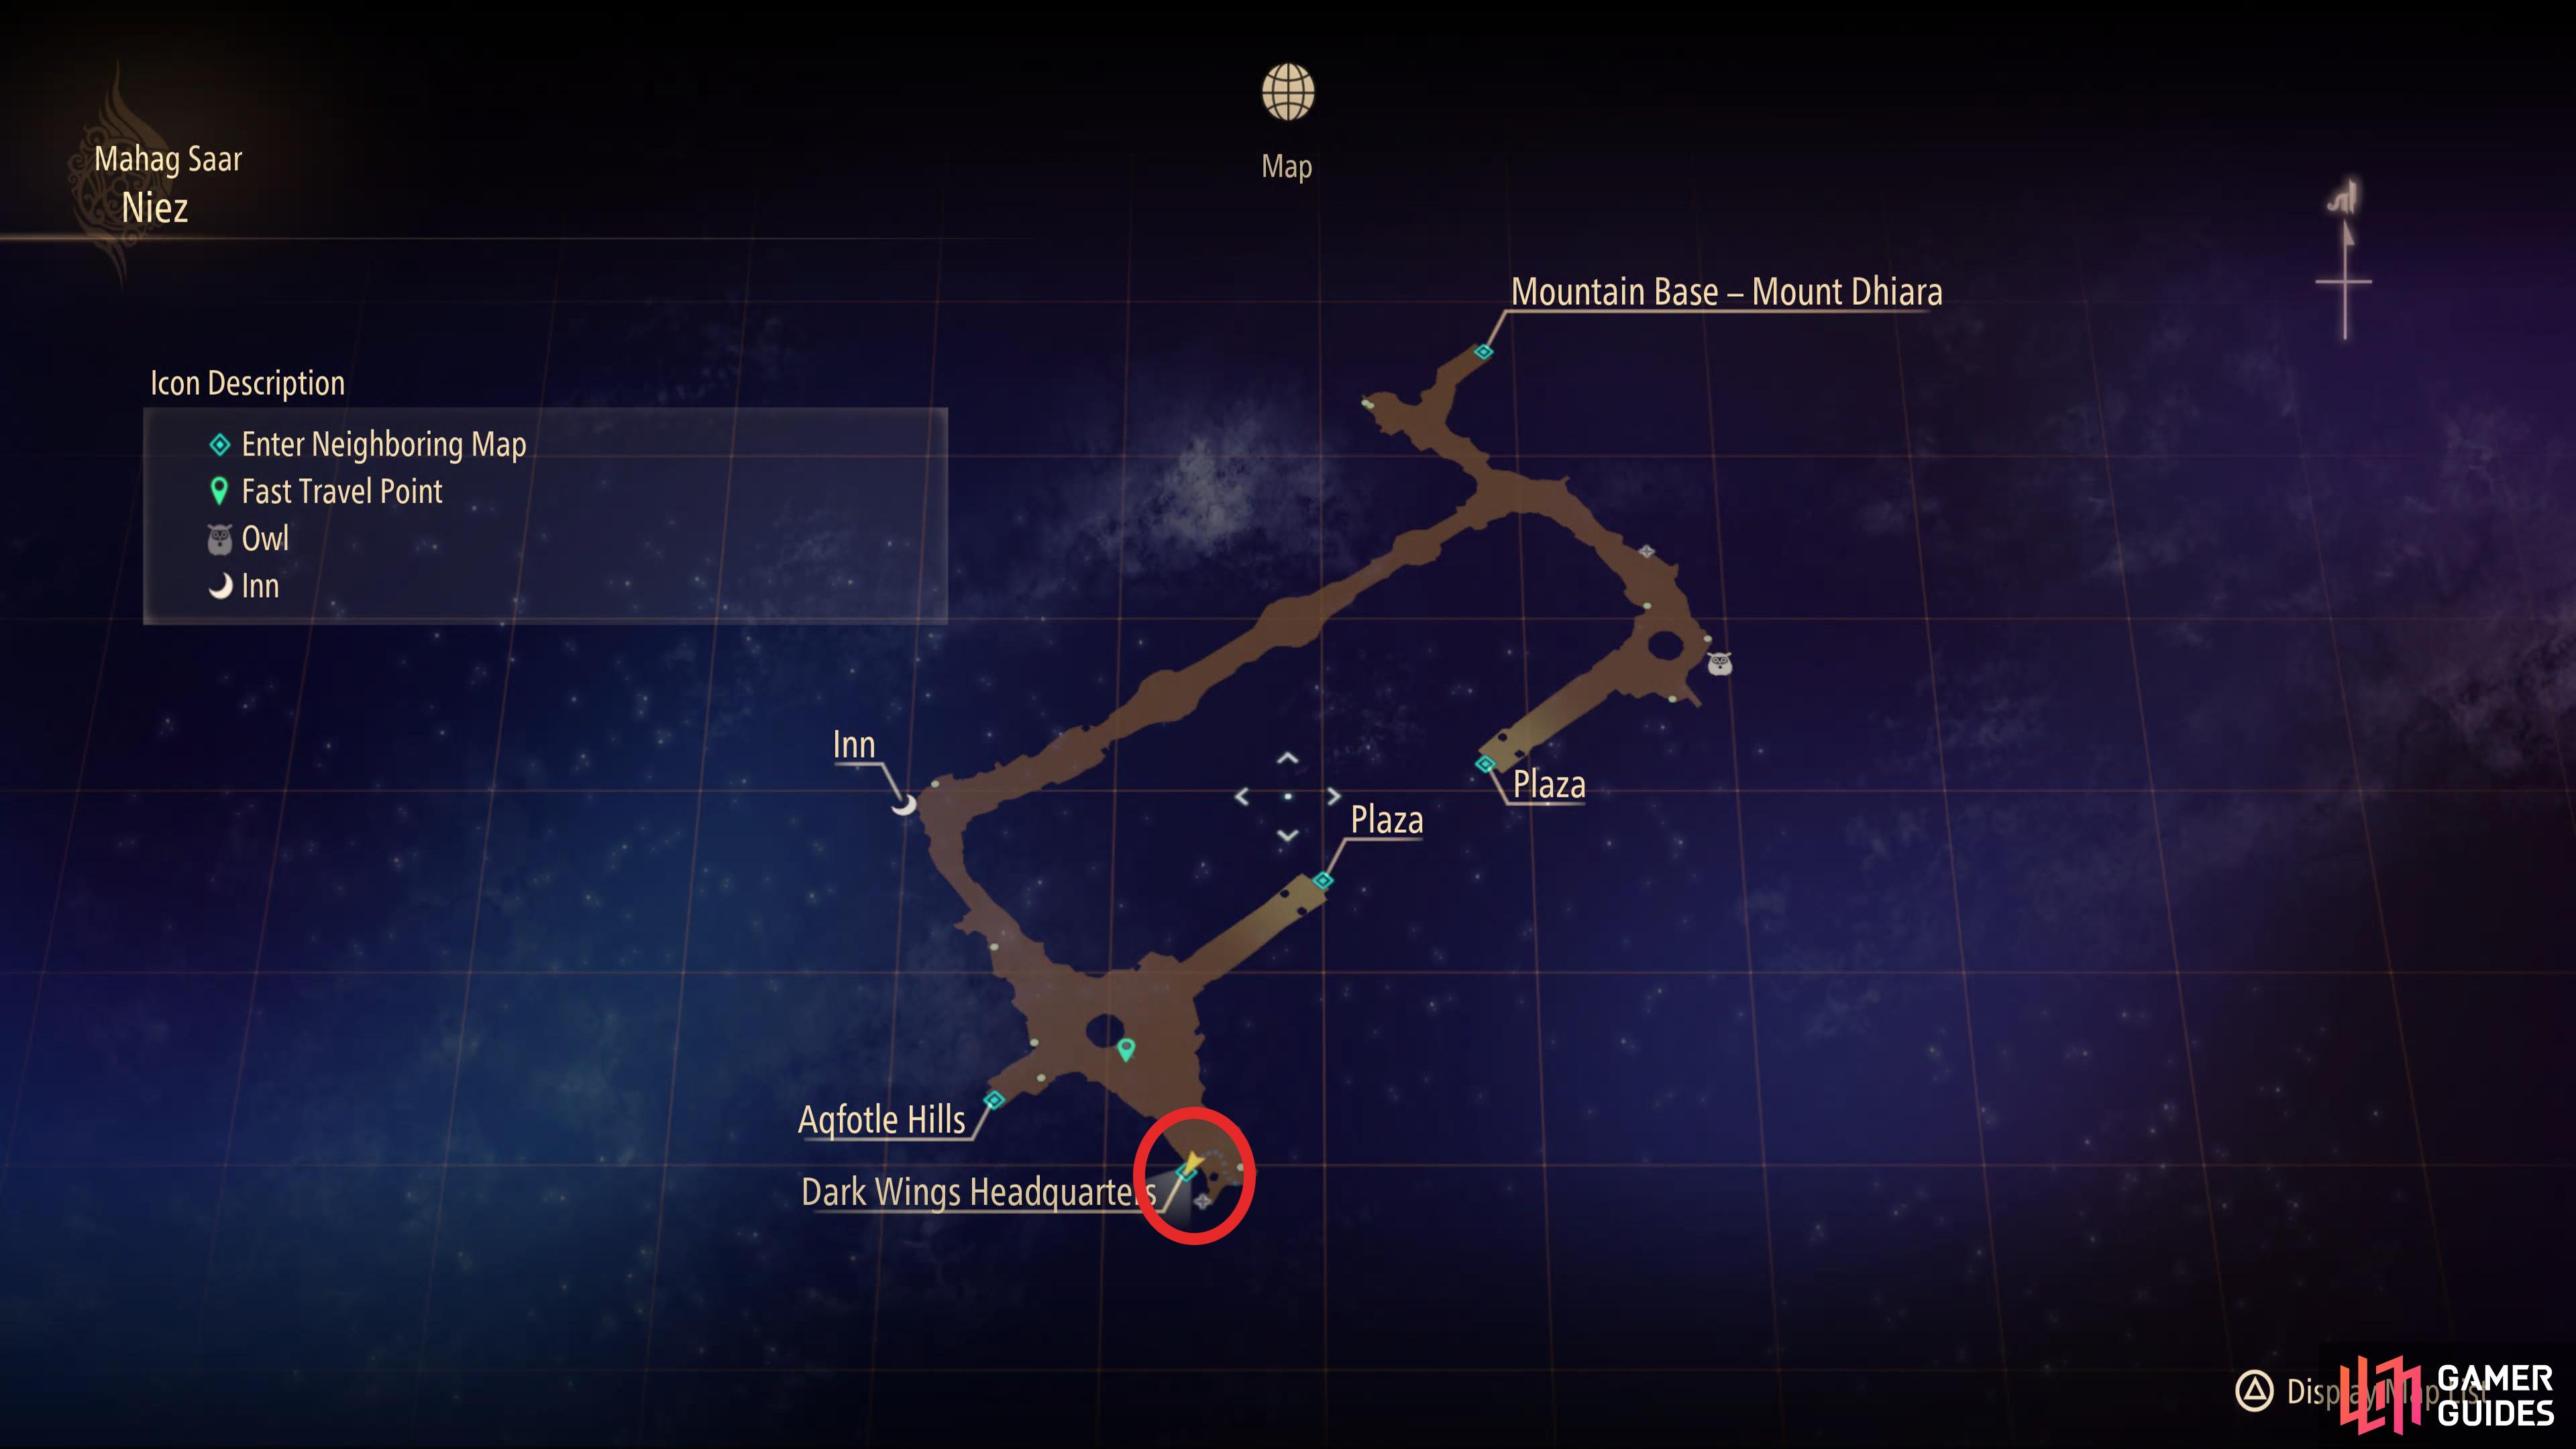 head over to Niez, and the Dark Wings Headquarters can be found in the bottom left corner of the map